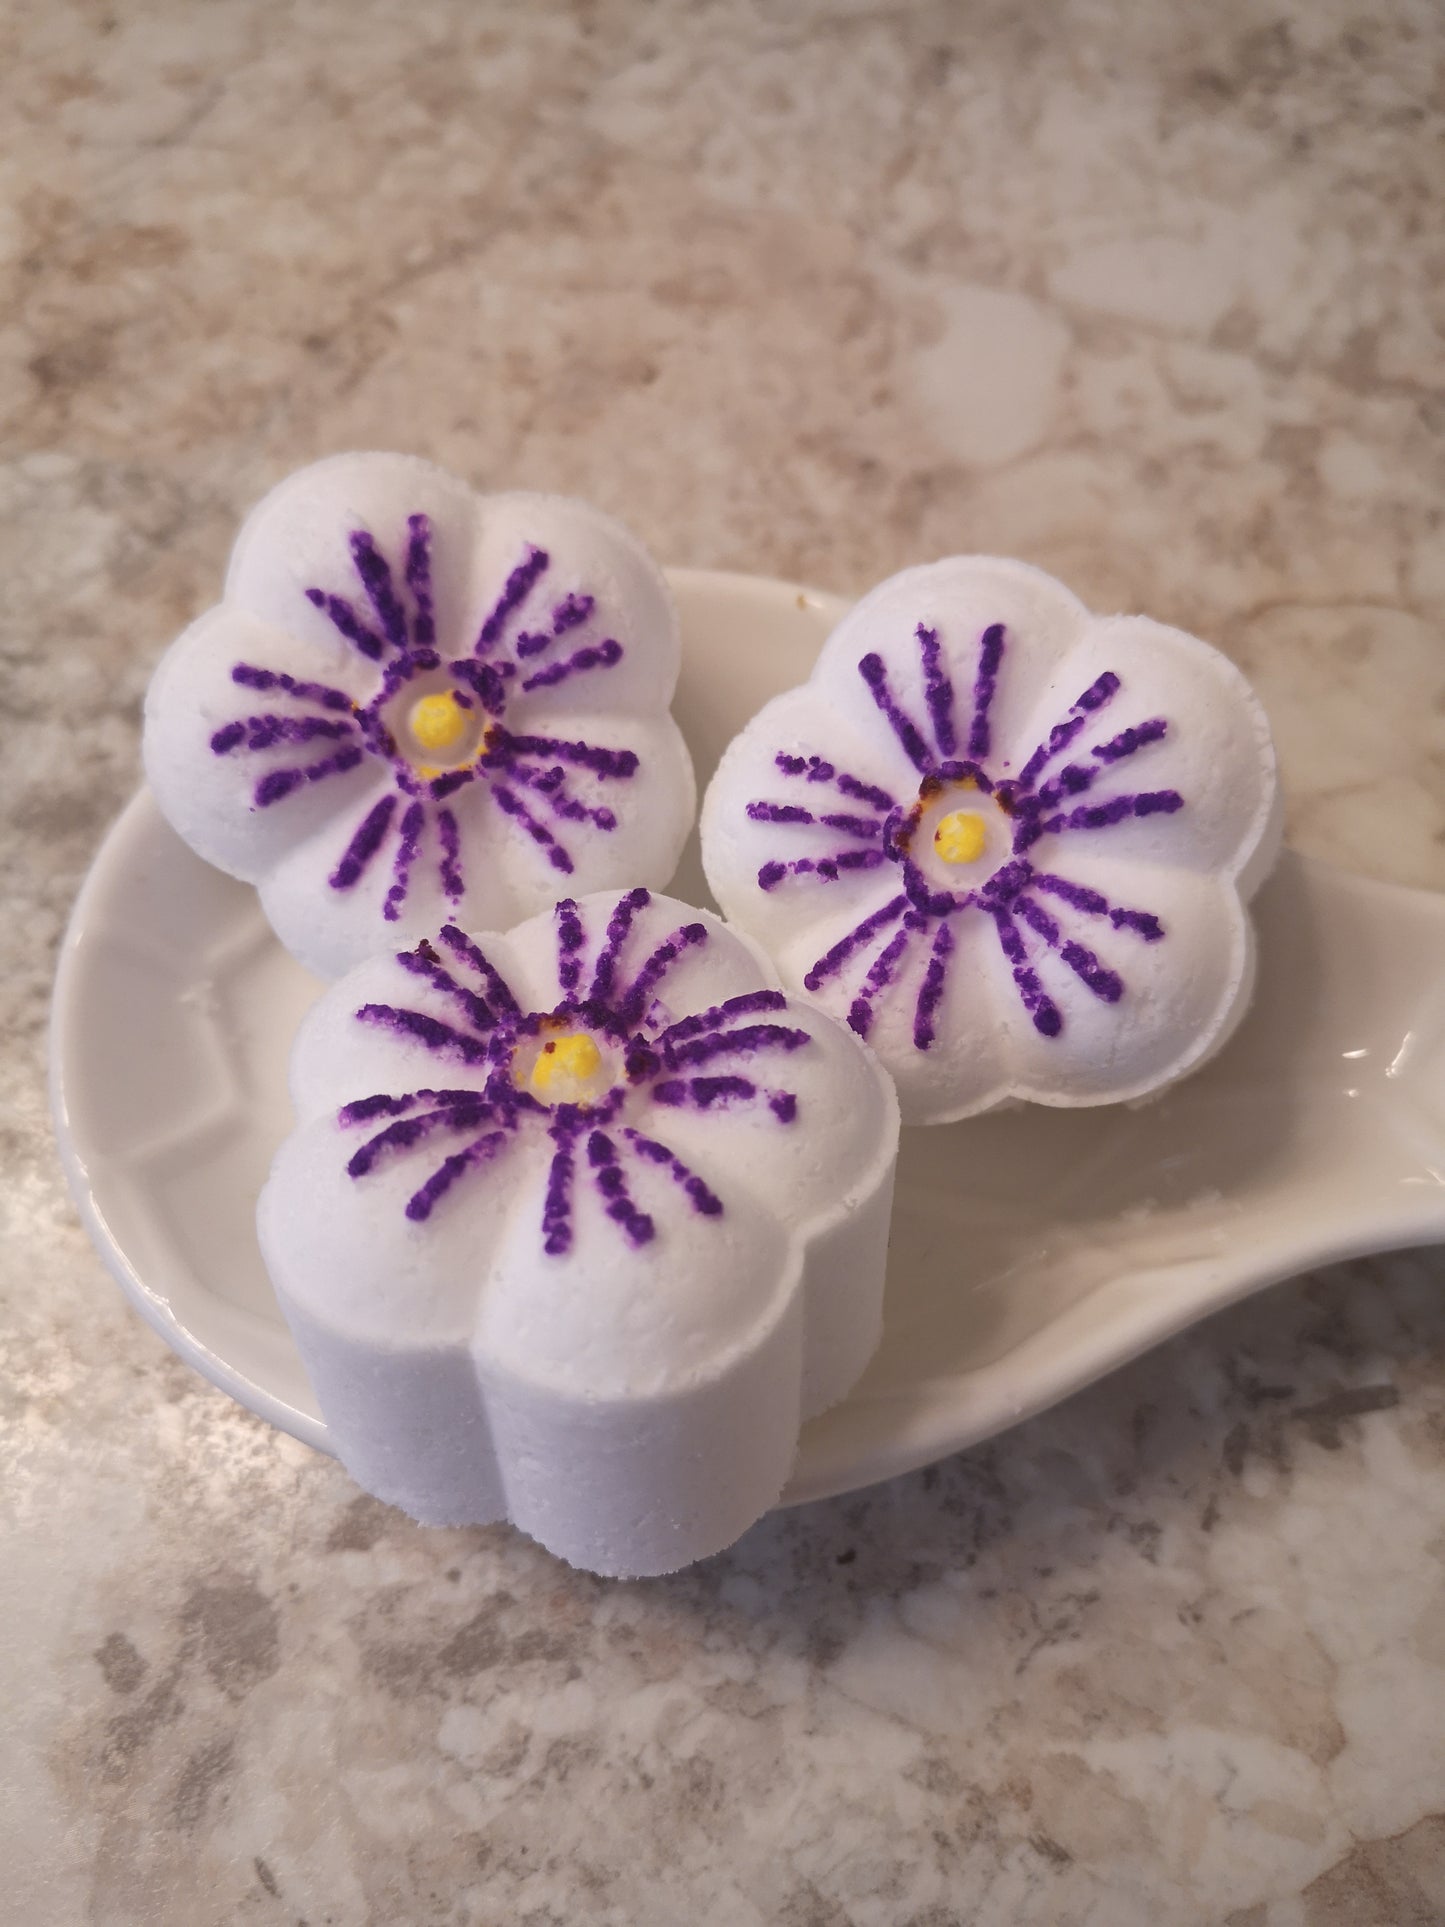 Three white flower shaped steamers with purple flower petals and yellow centres on a white ceramic spoon. Resting on a brown speckled counter top. 